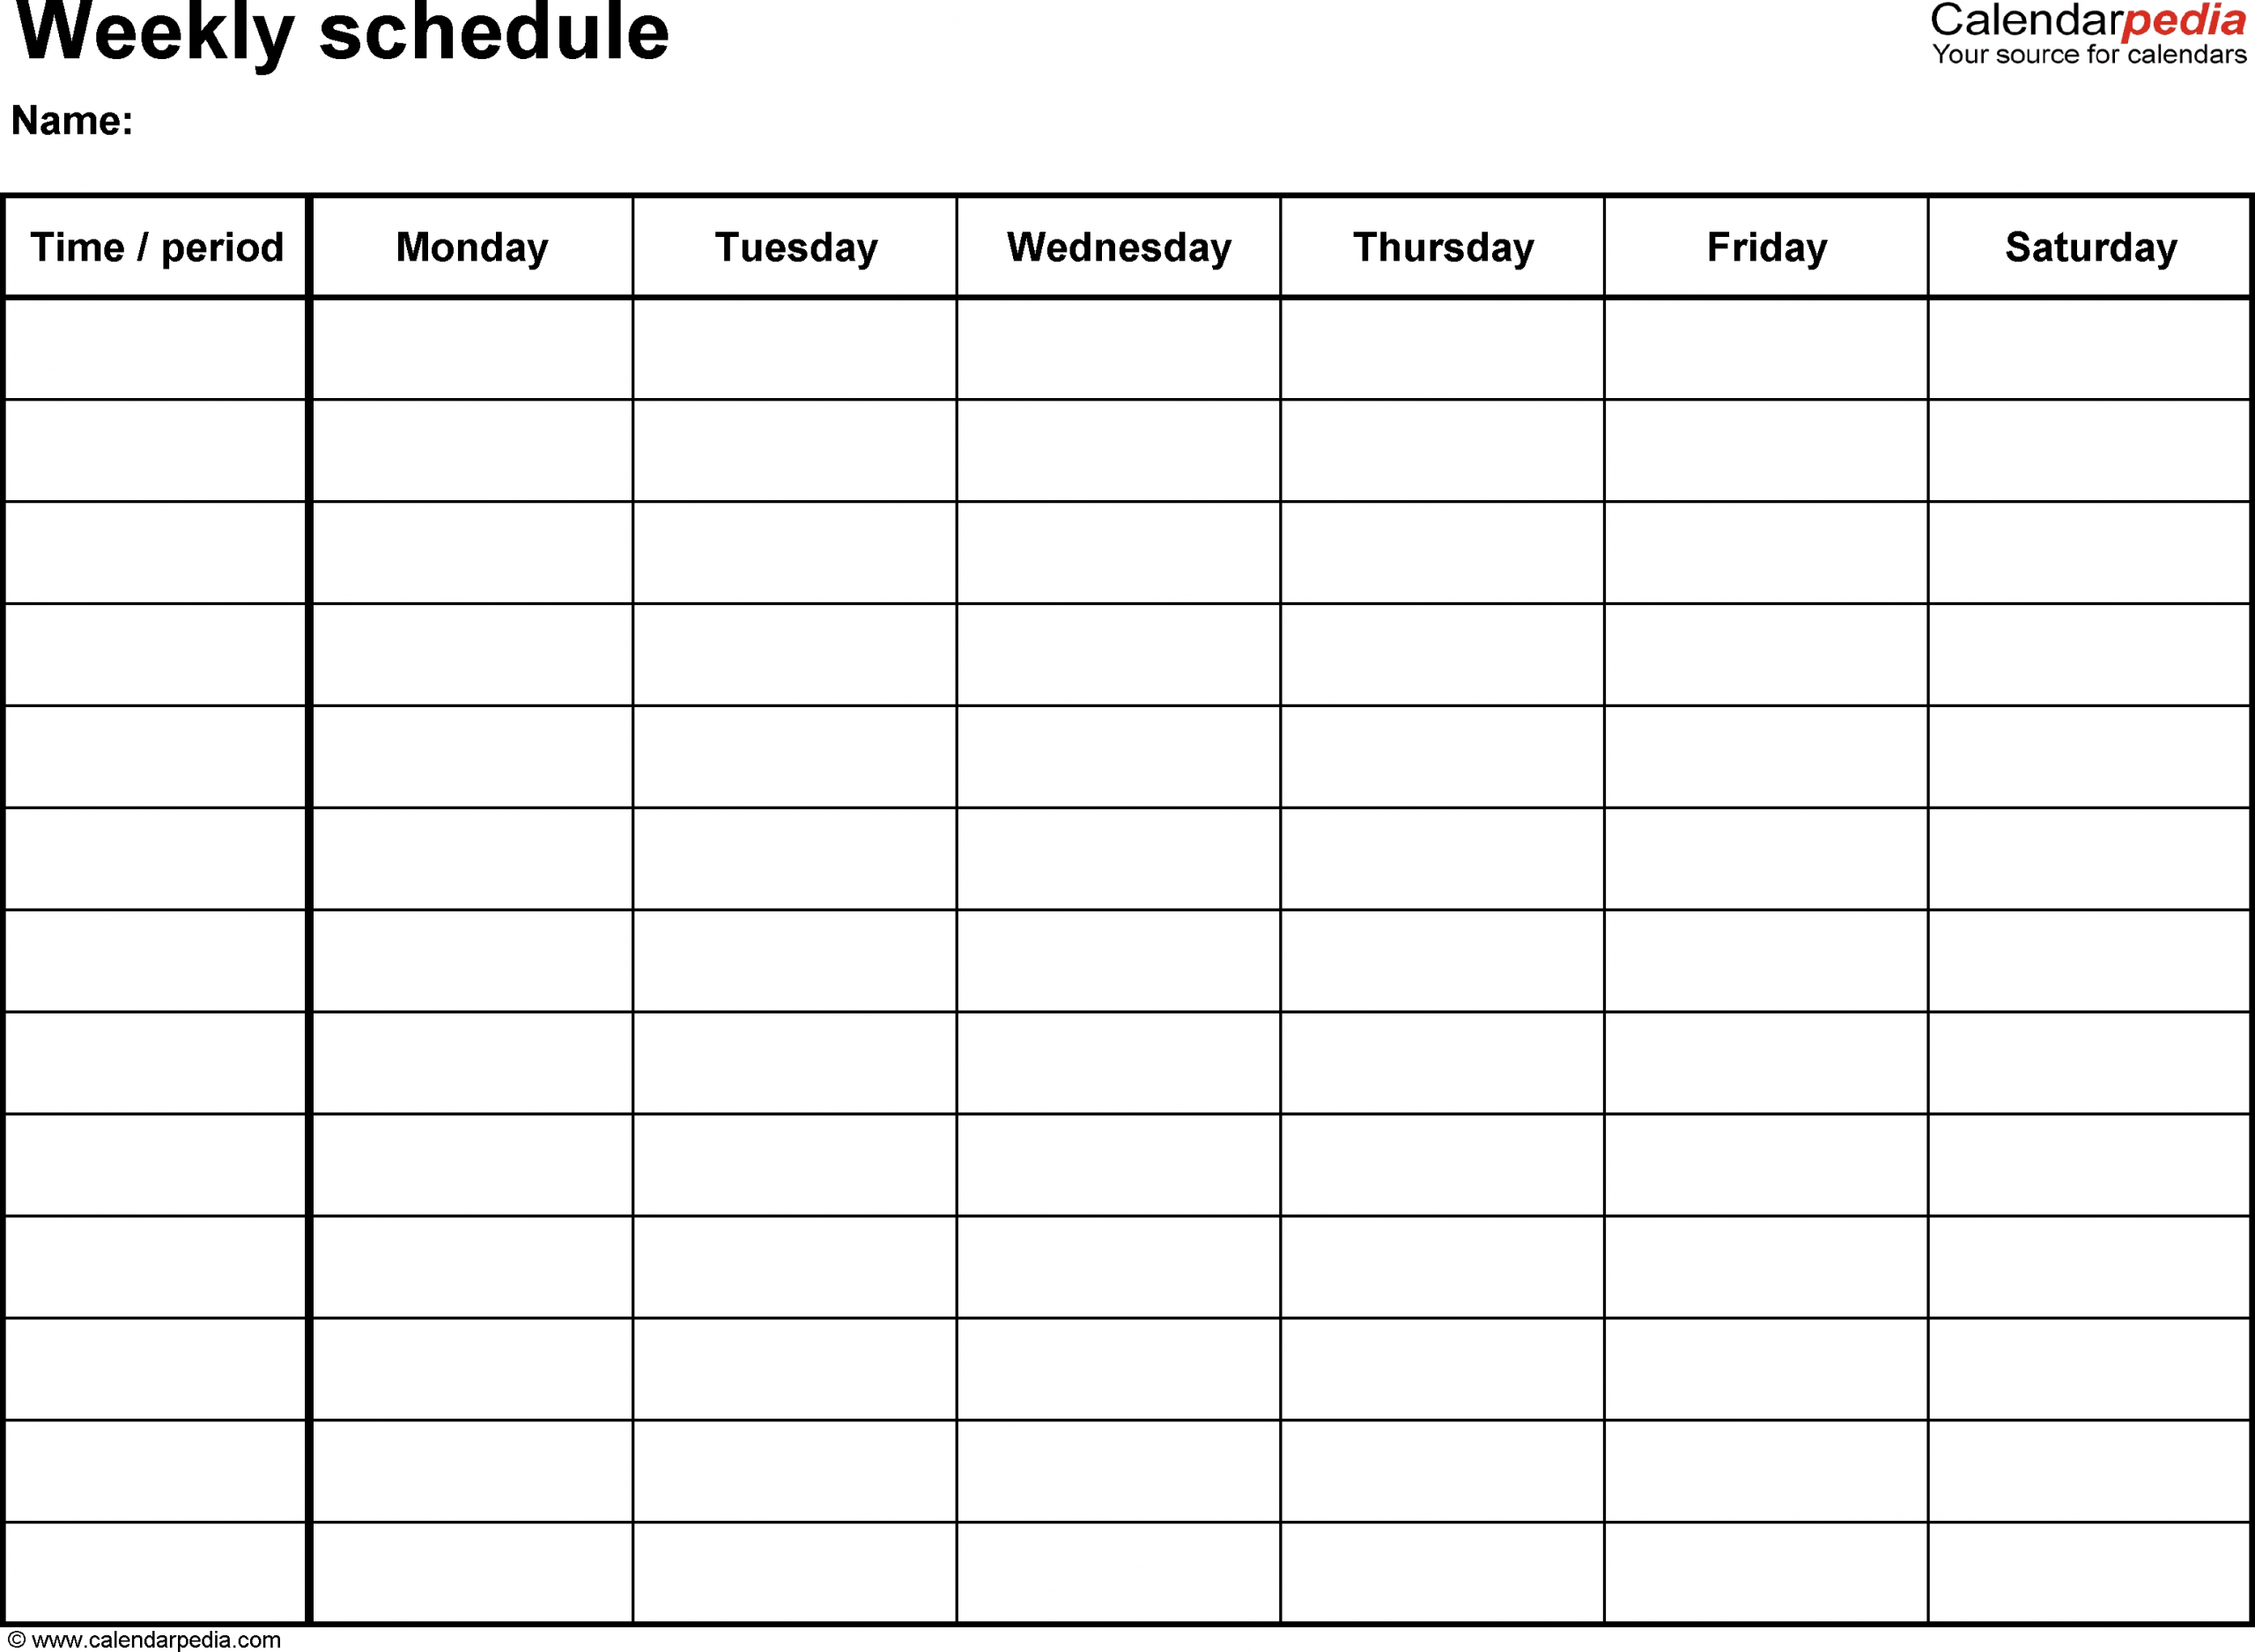 Weekly Schedule Template For Word Version 8: Landscape, 1